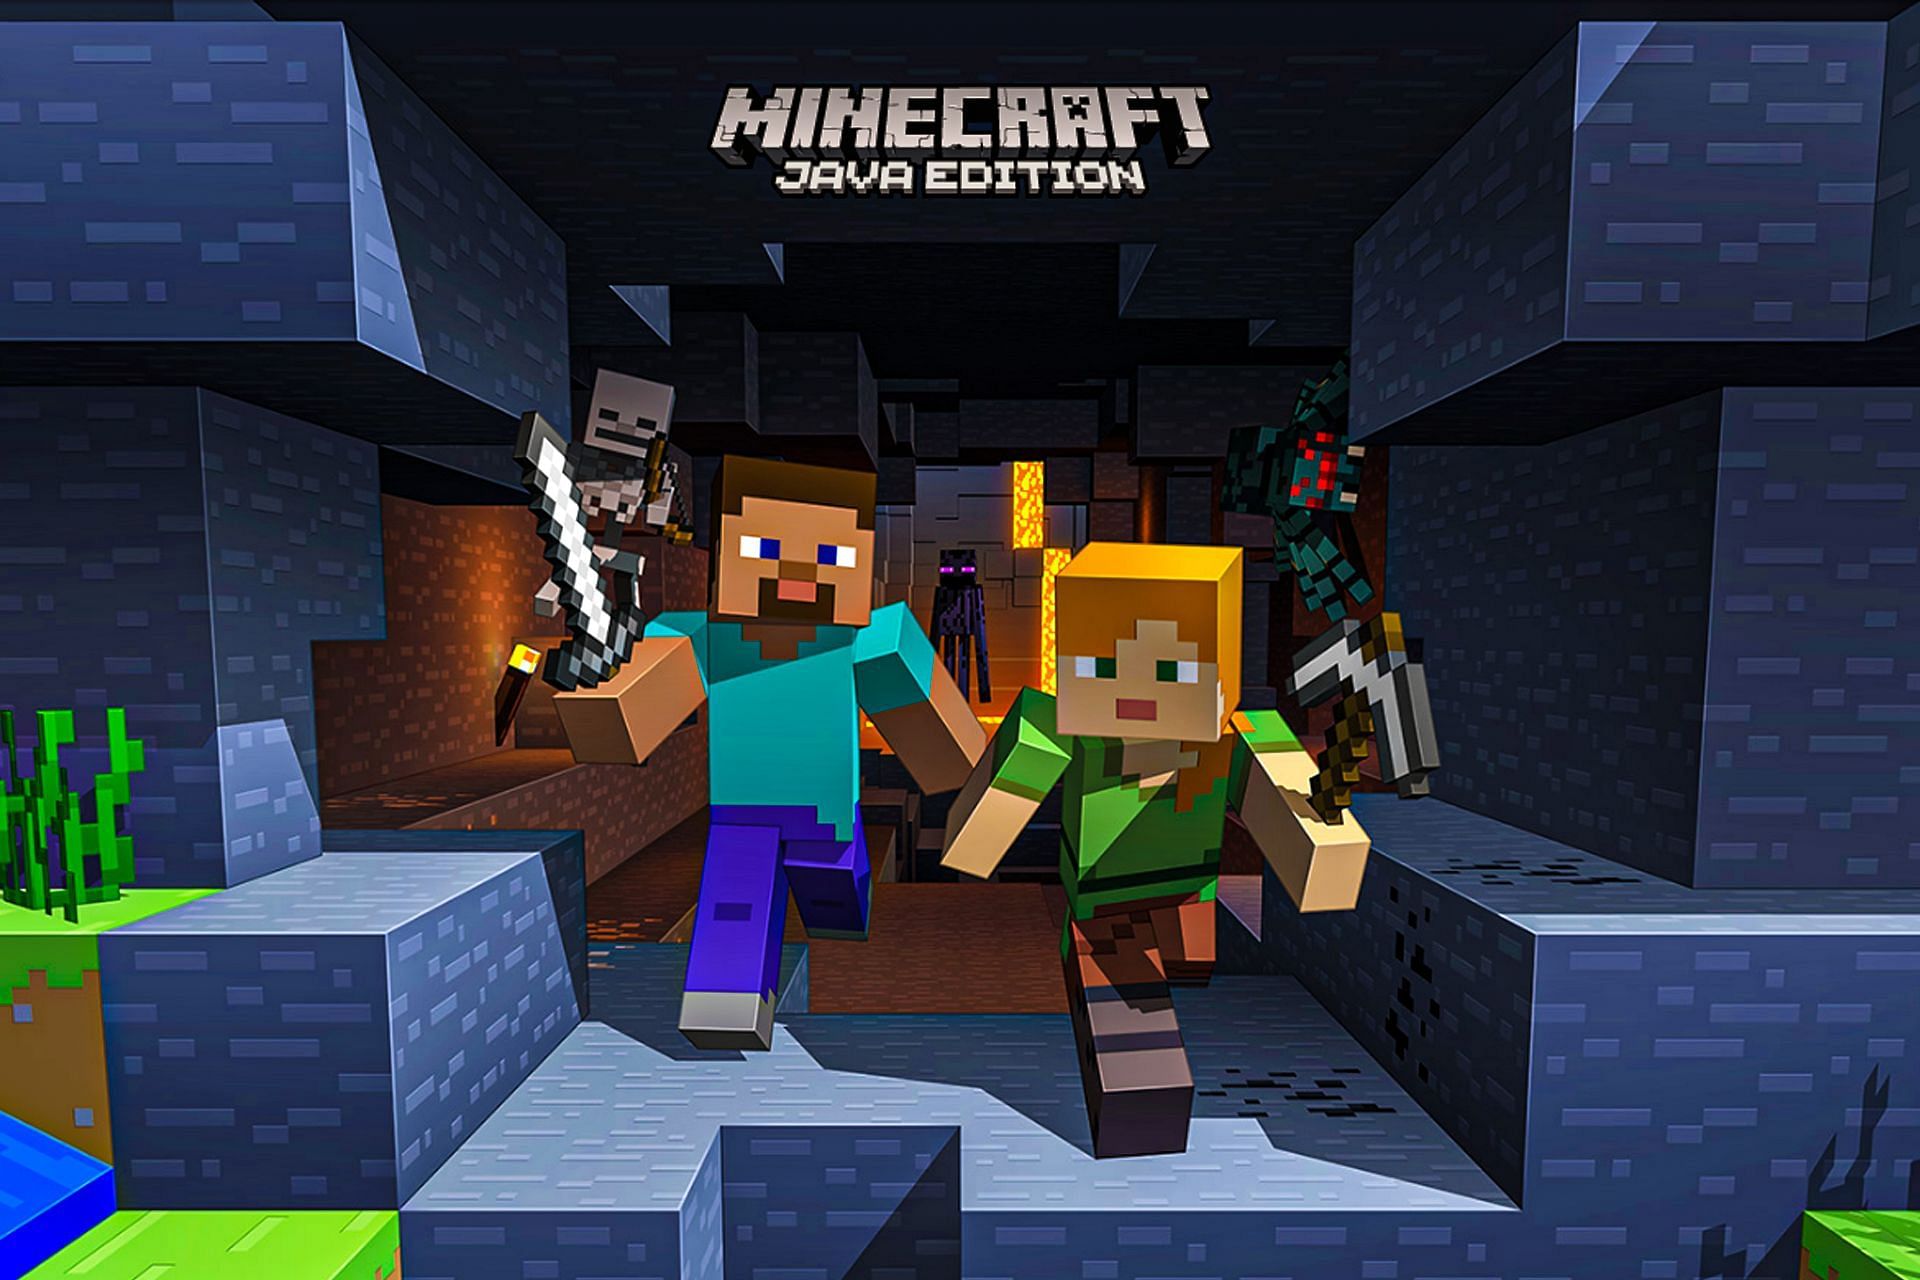 Minecraft Java Edition download: How to download the latest version in 2022